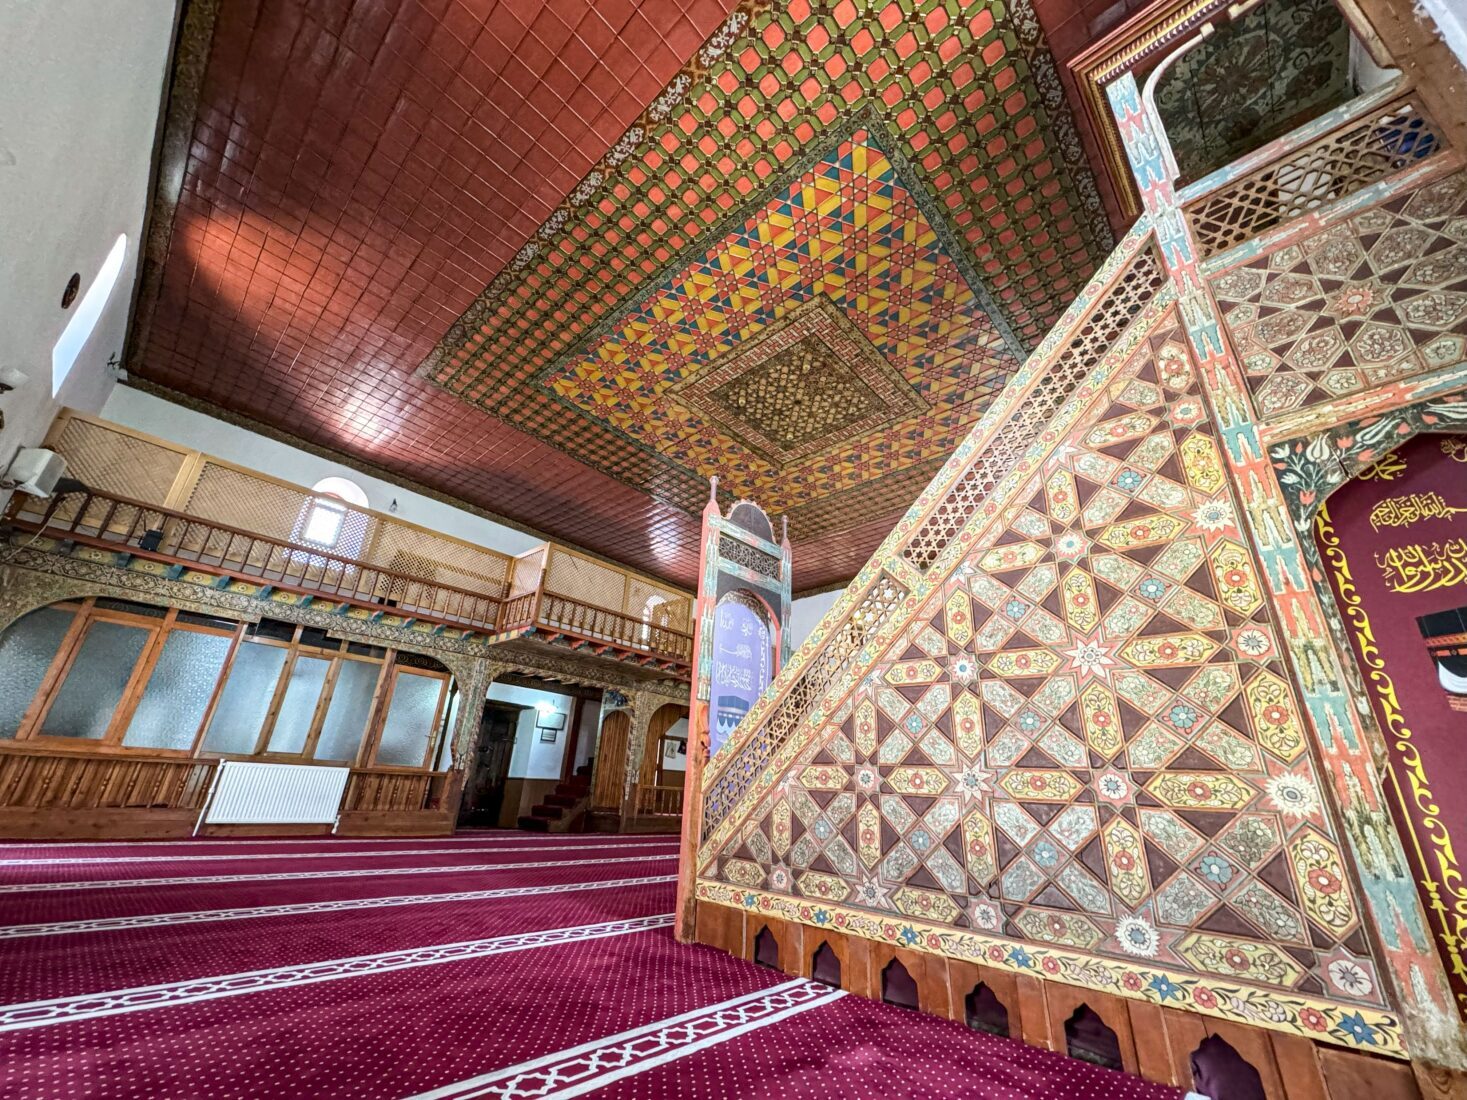 600-year-old mosque's intriguing wooden ceiling motifs captivate visitors